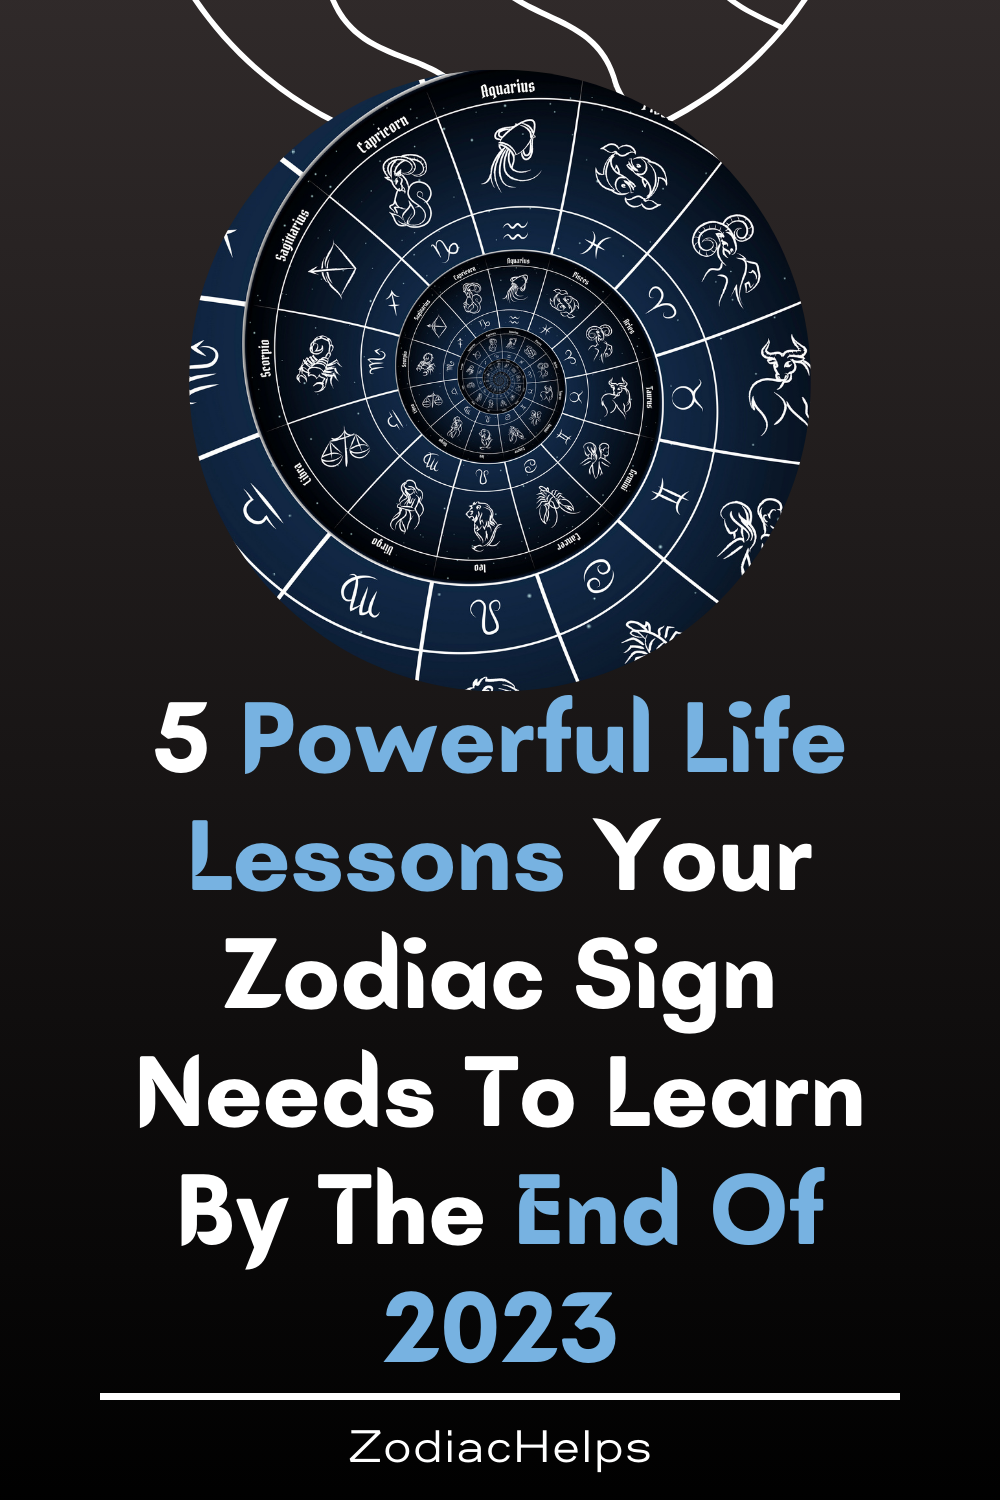 5 Powerful Life Lessons Your Zodiac Sign Needs To Learn By The End Of 2023